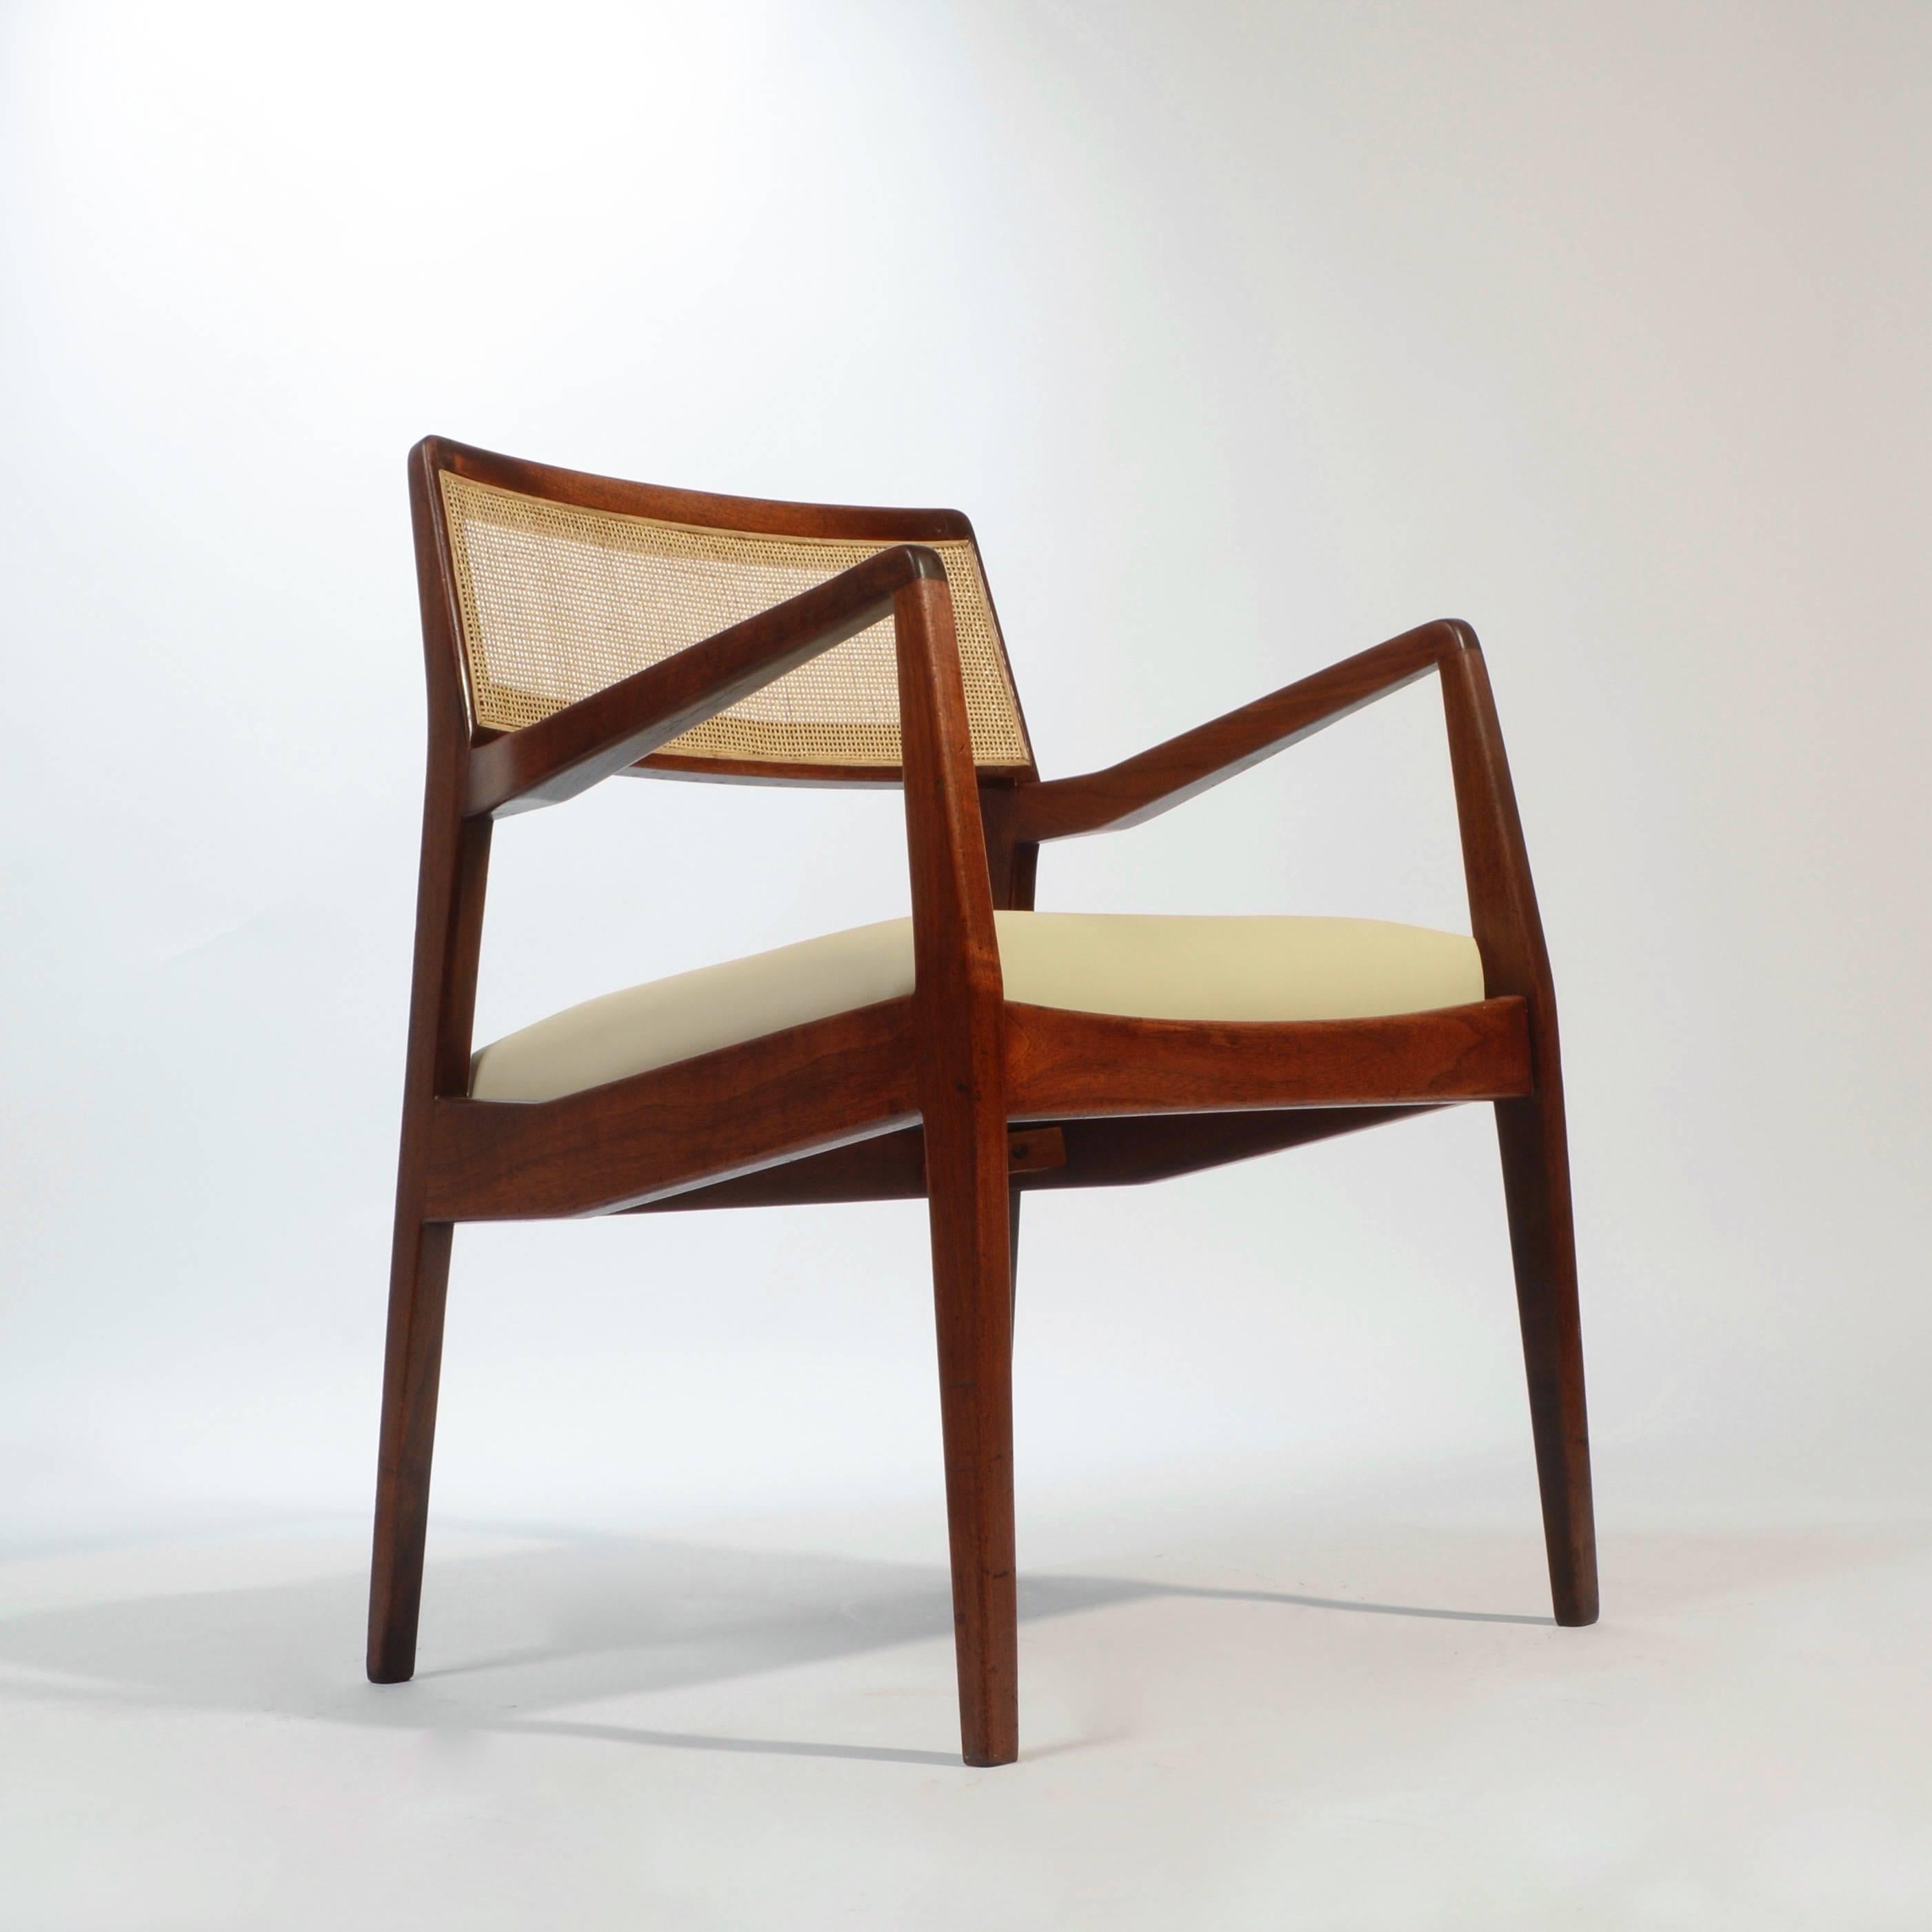 Set of four fully restored Jens Risom 'Playboy' chairs, model C140. This set features all new cushions and leather upholstery, new professionally installed cane, and newly oiled walnut.